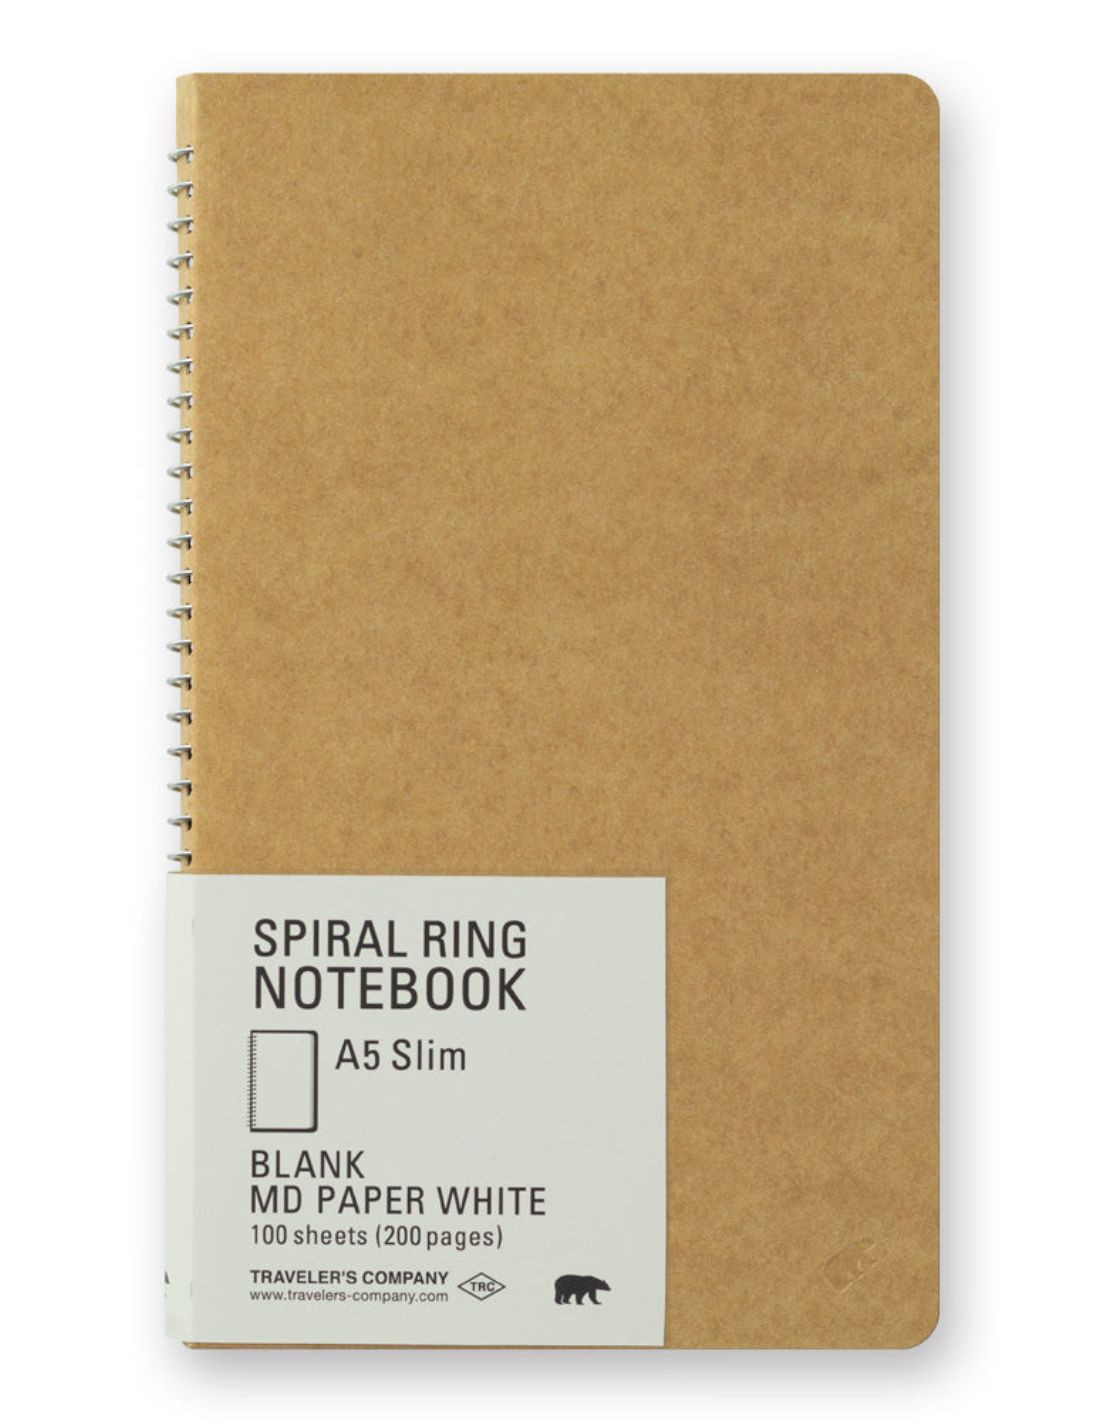 A5 Slim Blank MD Paper White - Spiral Ring Notebook - Traveler's Company